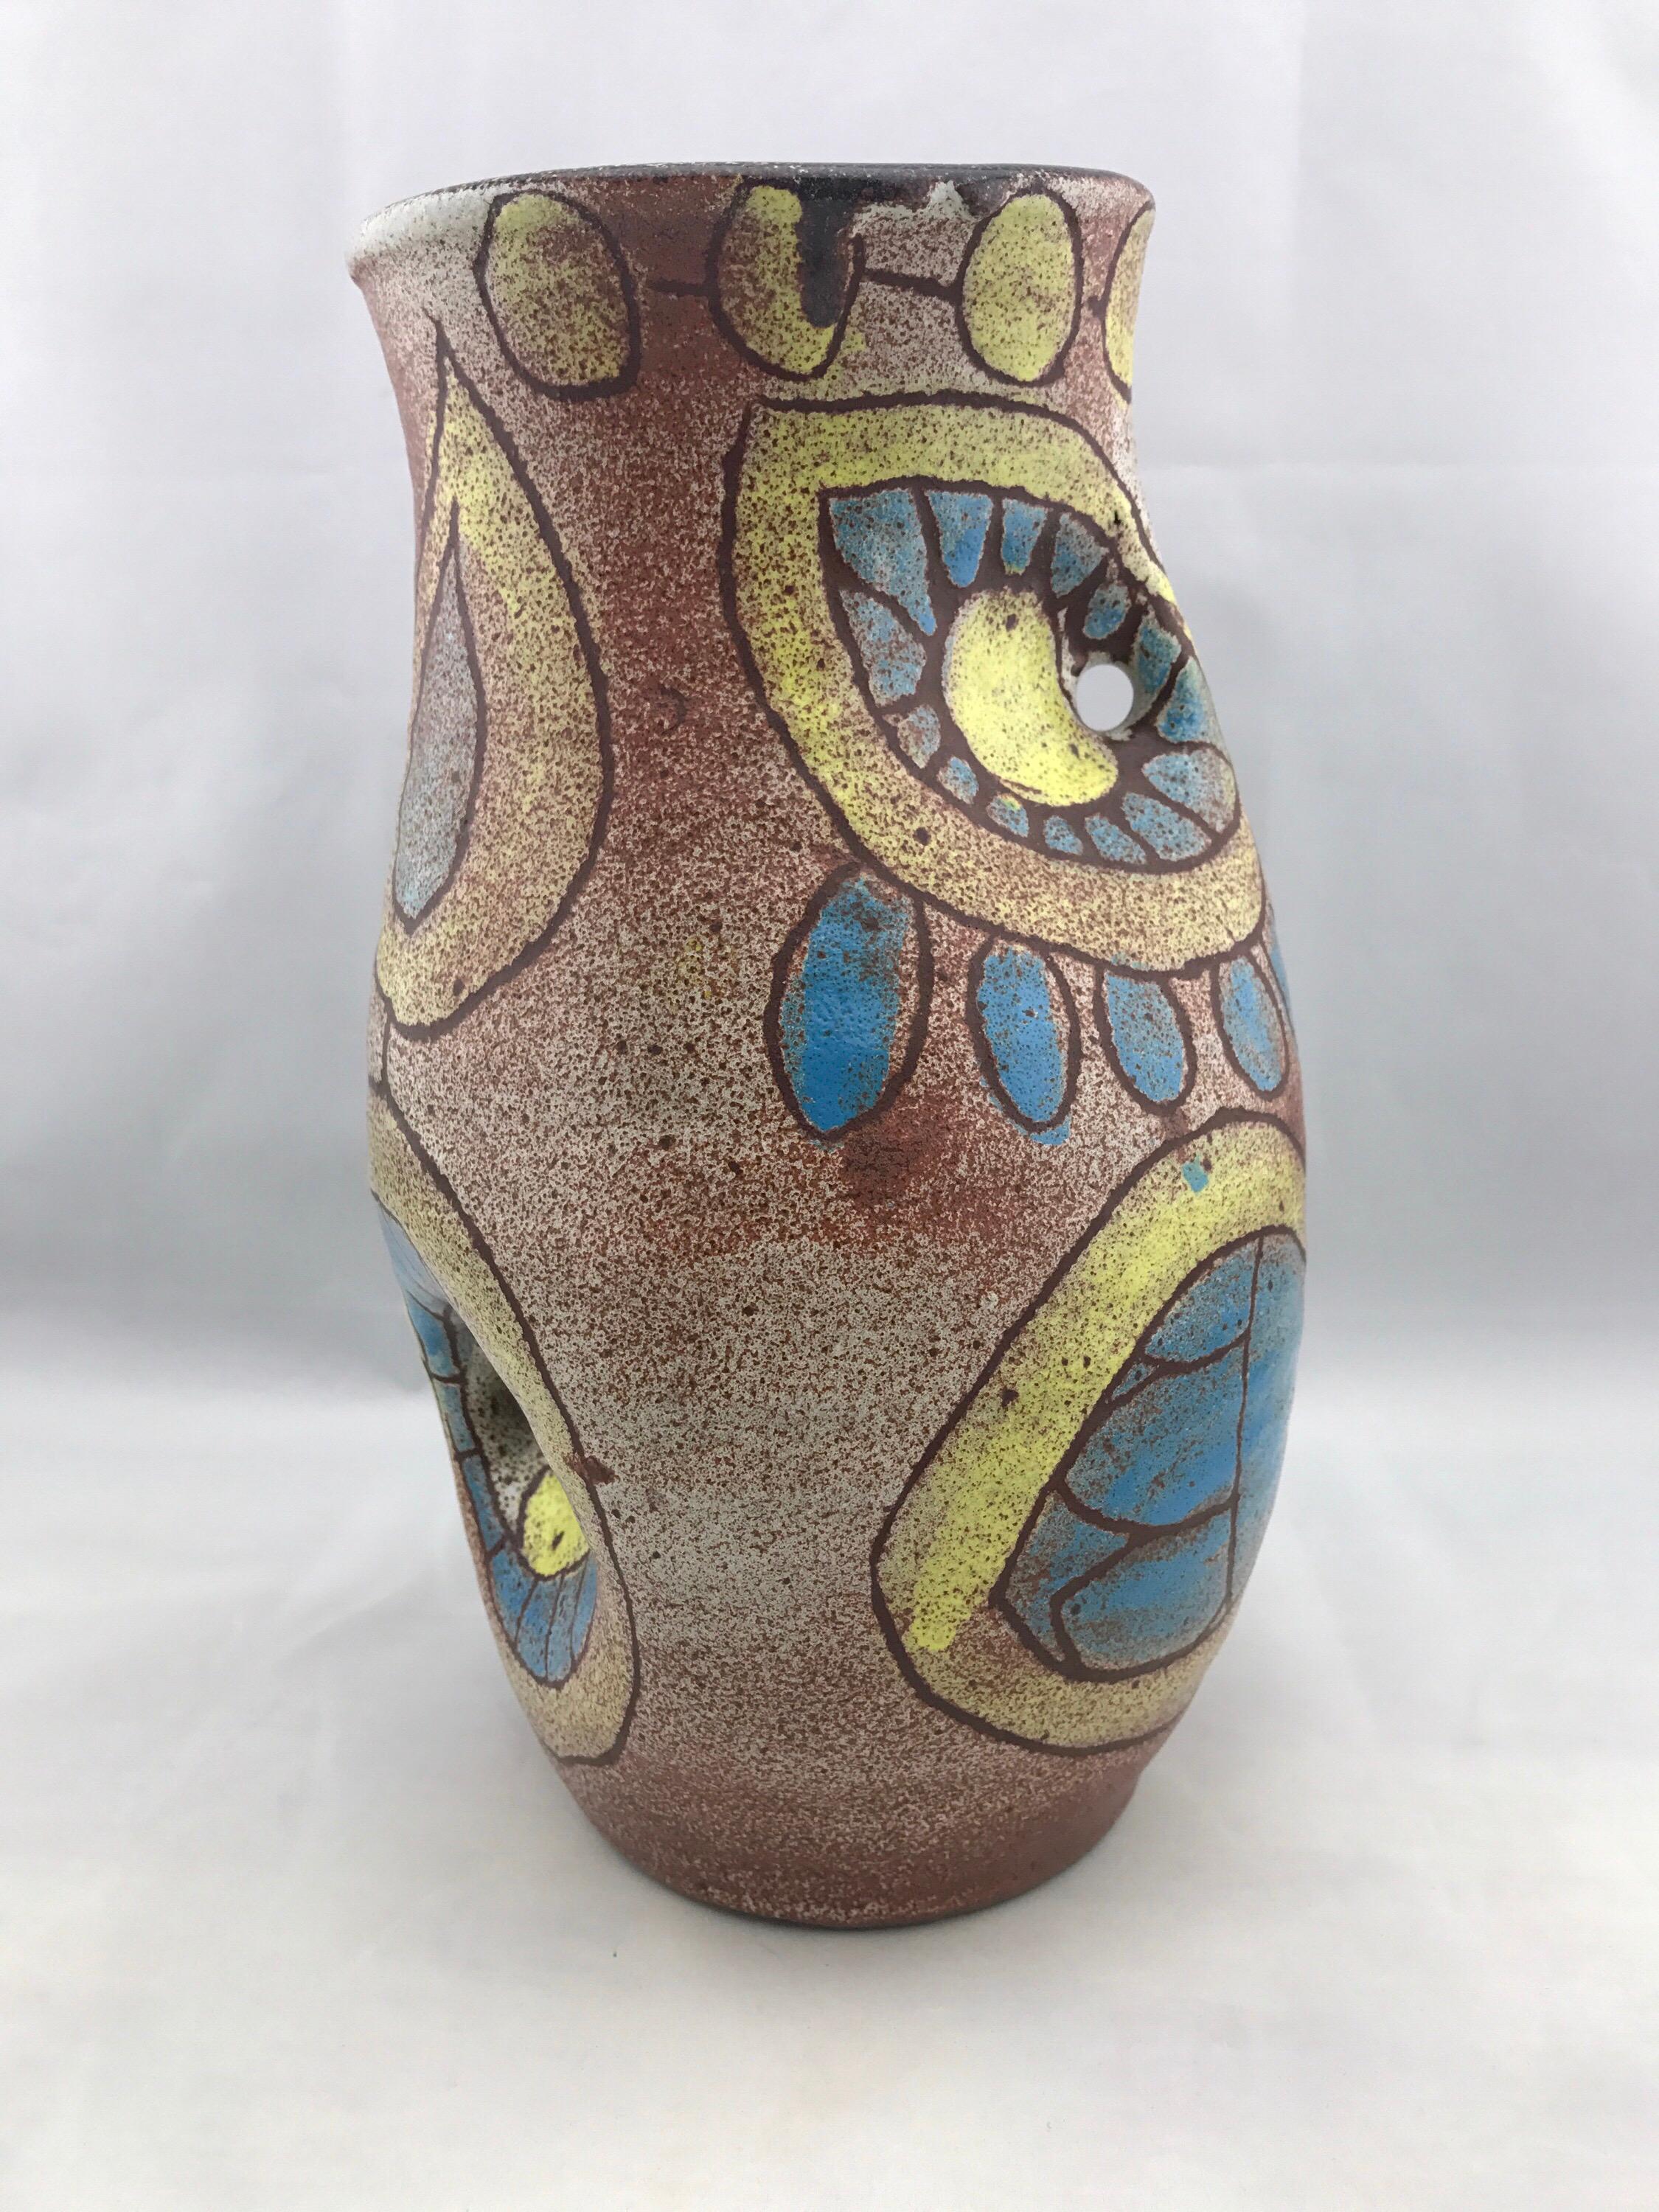 Ceramic Mid-Century Modern French Vase by Accolay, Vintage Blue & Yellow Modernist Owl